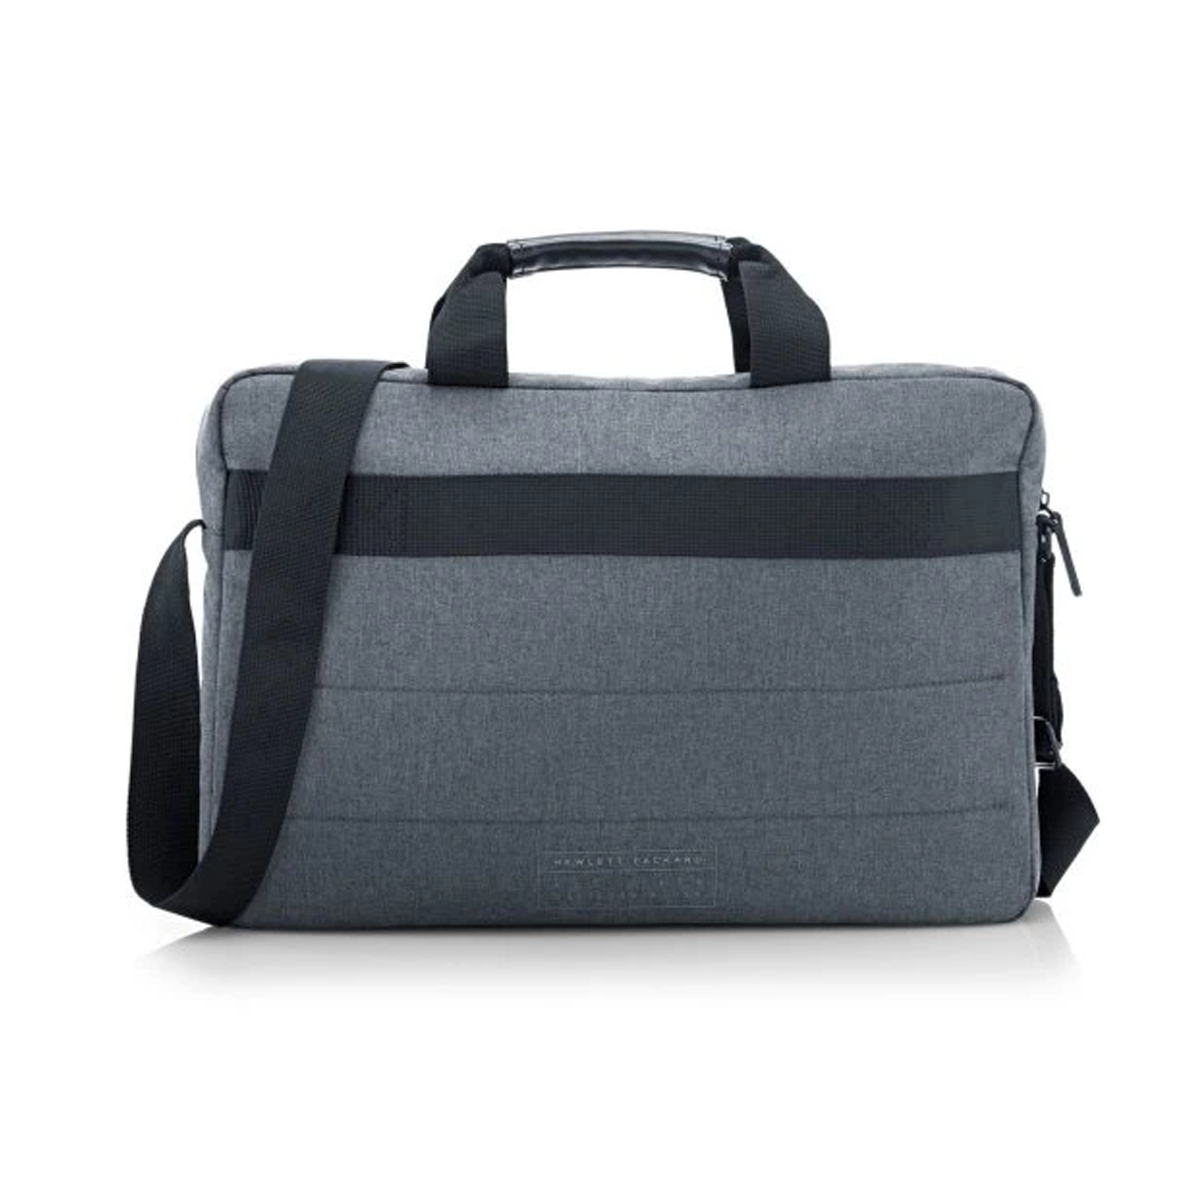 CARRYCASE KOB3AA-GRY- HP